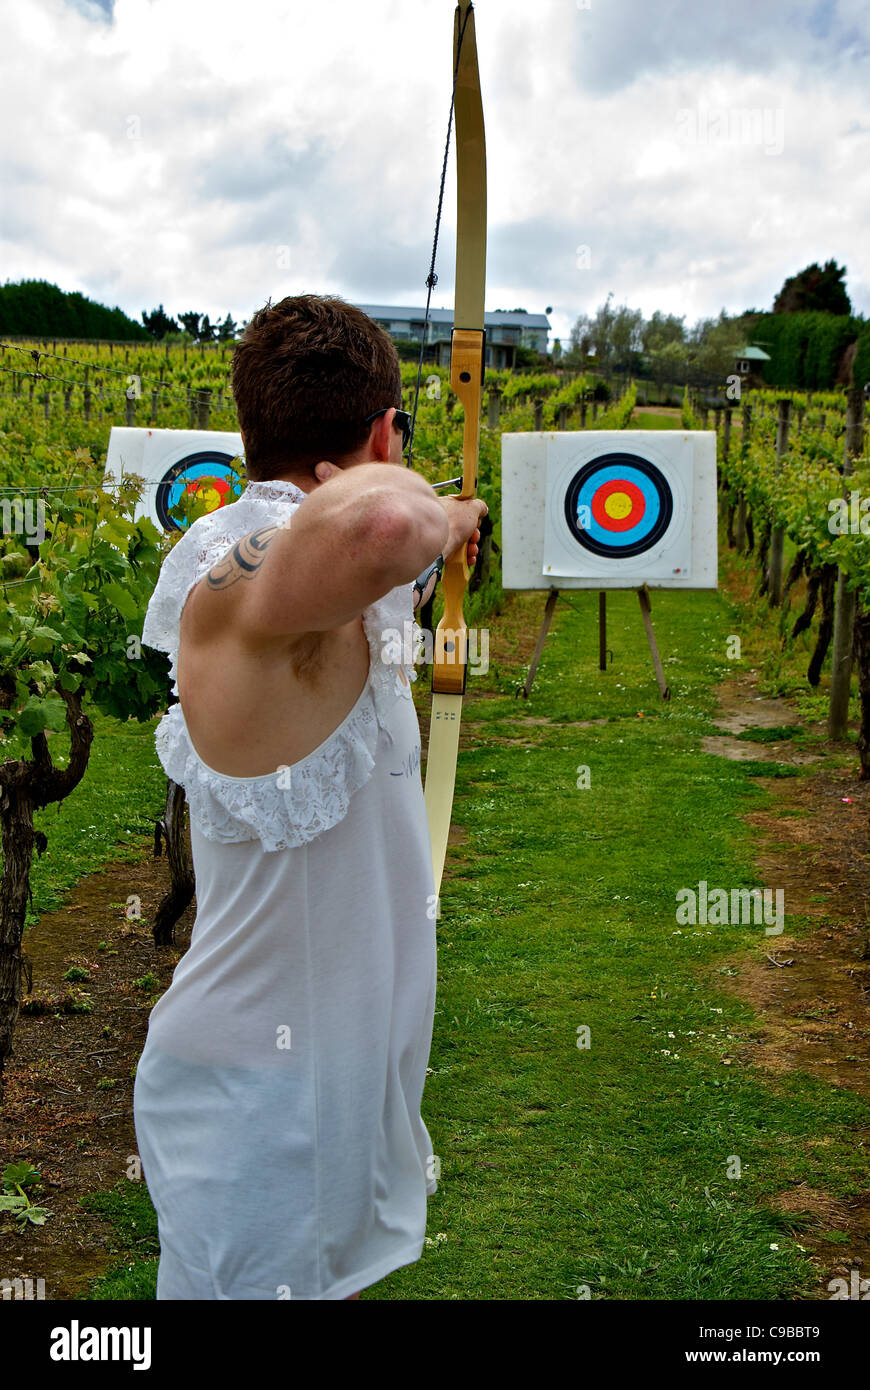 Bachelor party honoree in frilly slip trying archery at Wild on Waiheke vineyard Stock Photo